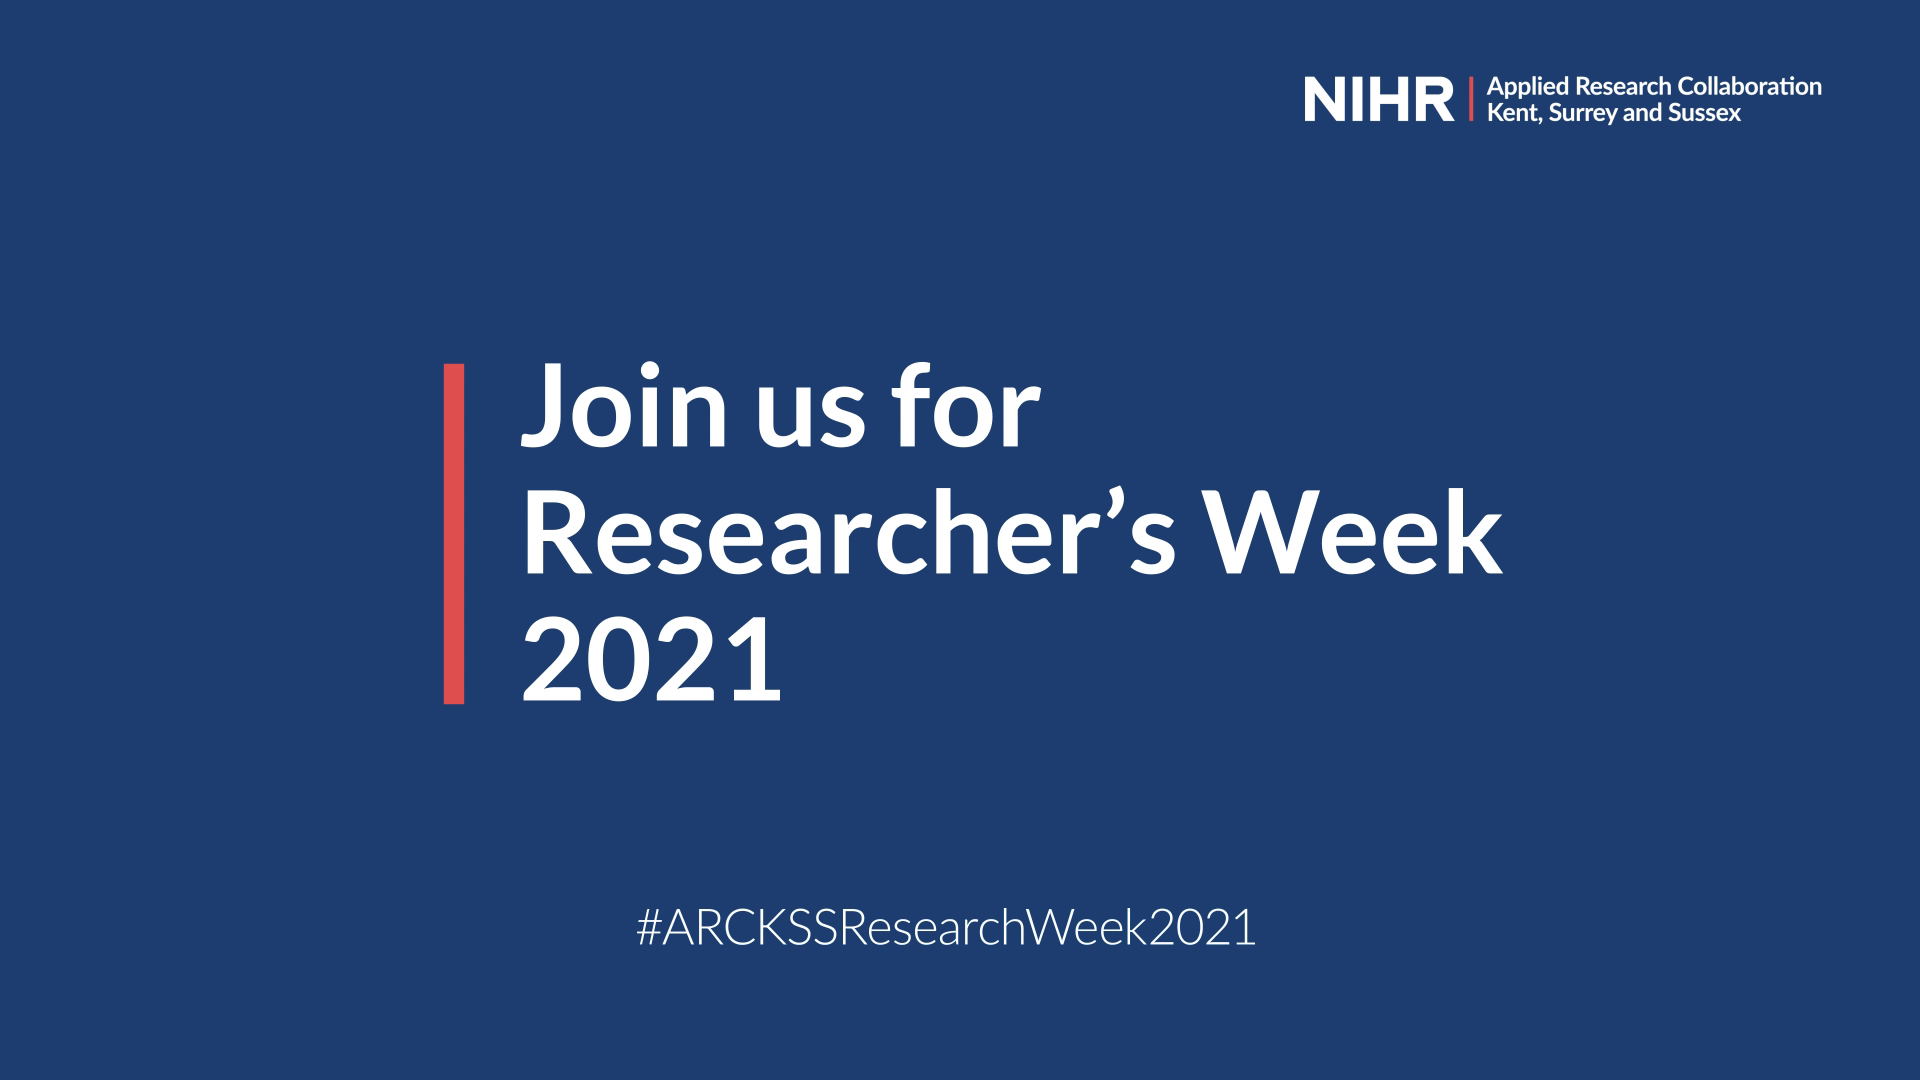 <?php echo Join us for ARC KSS Researcher's Week (12-16 July); ?> News Item Intro Image